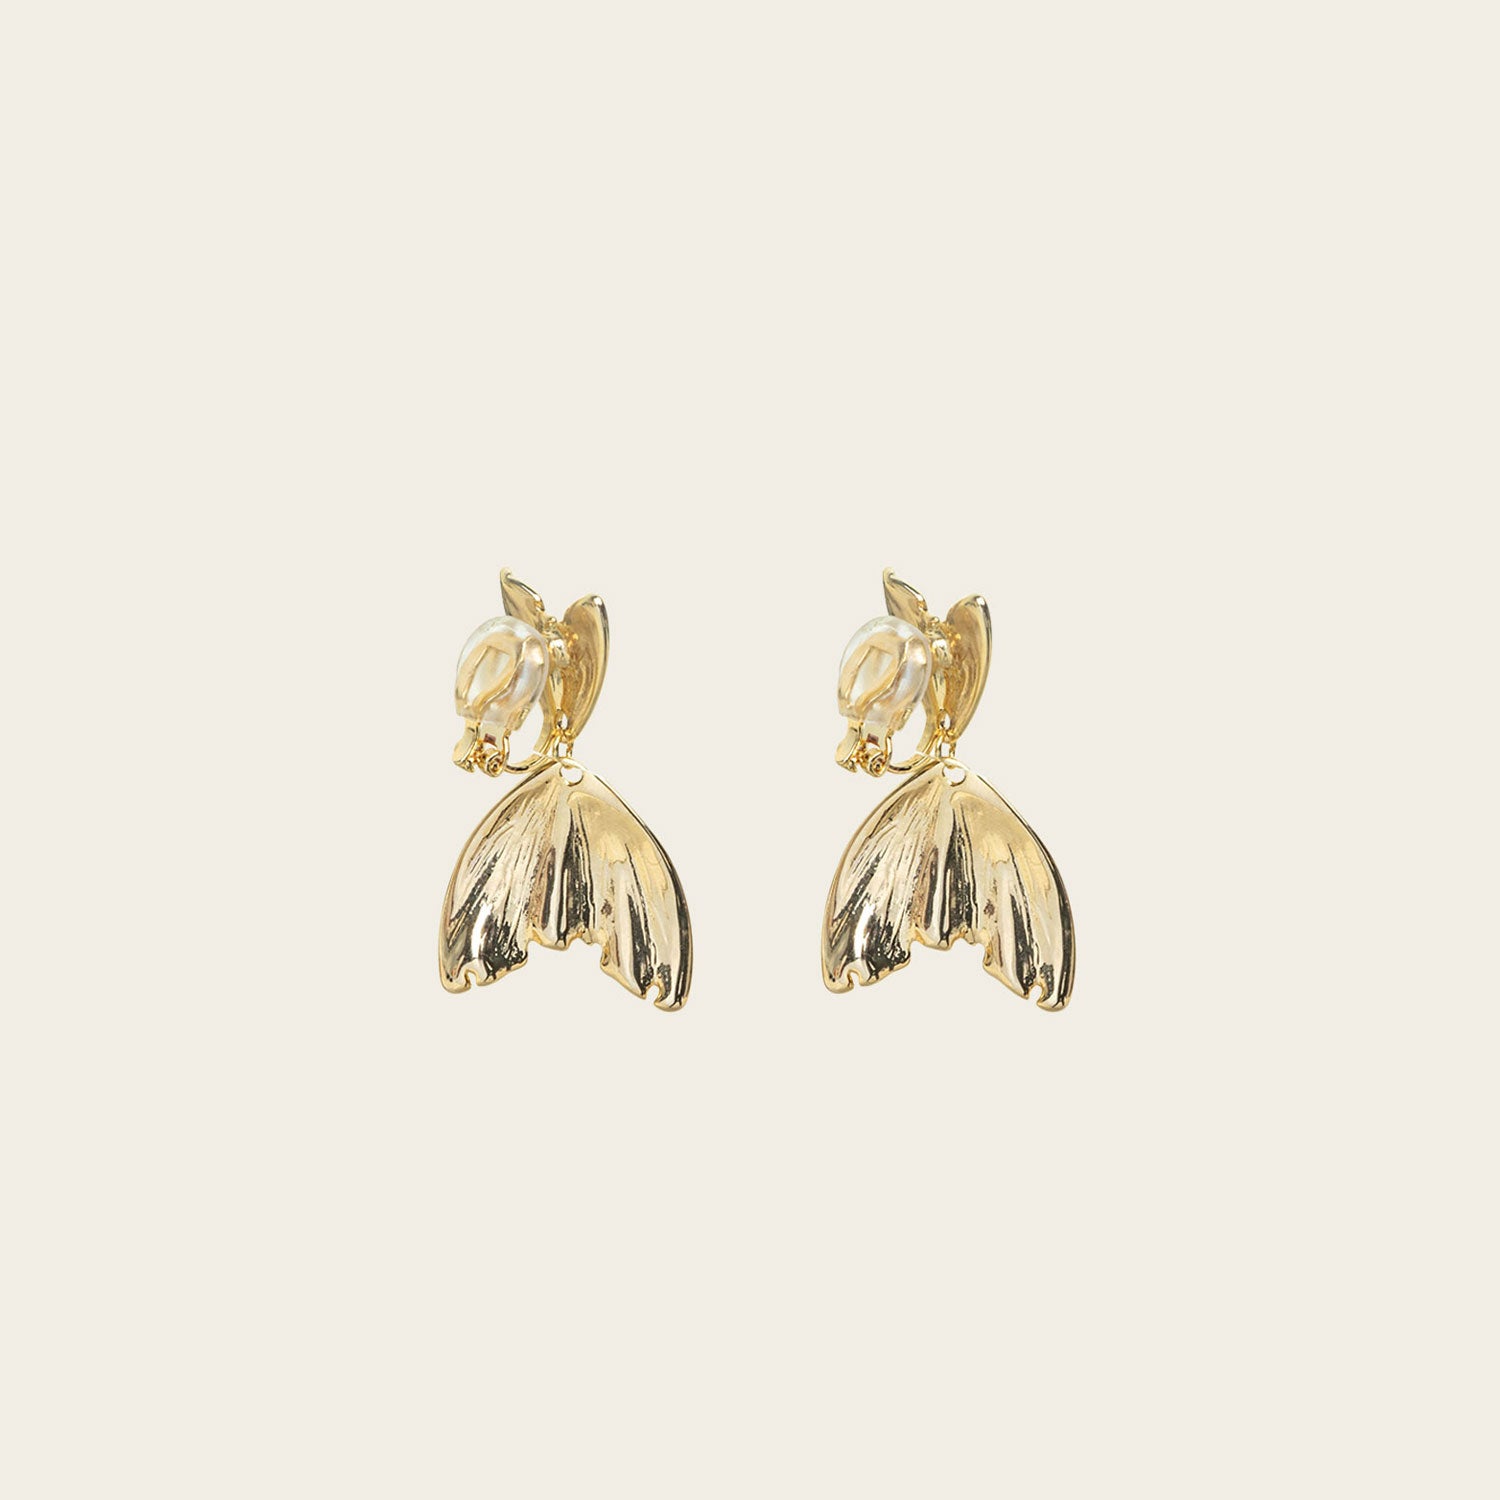 Image of the Mermaid Tail Clip On Earrings in Gold are perfect for all ear types including thick/large ears, sensitive ears, small/thin ears, and stretched/healing ears. With a zinc alloy body, these earrings offer a secure hold of up to 8-12 hours and come with removable rubber padding. Please note, item is only one pair.